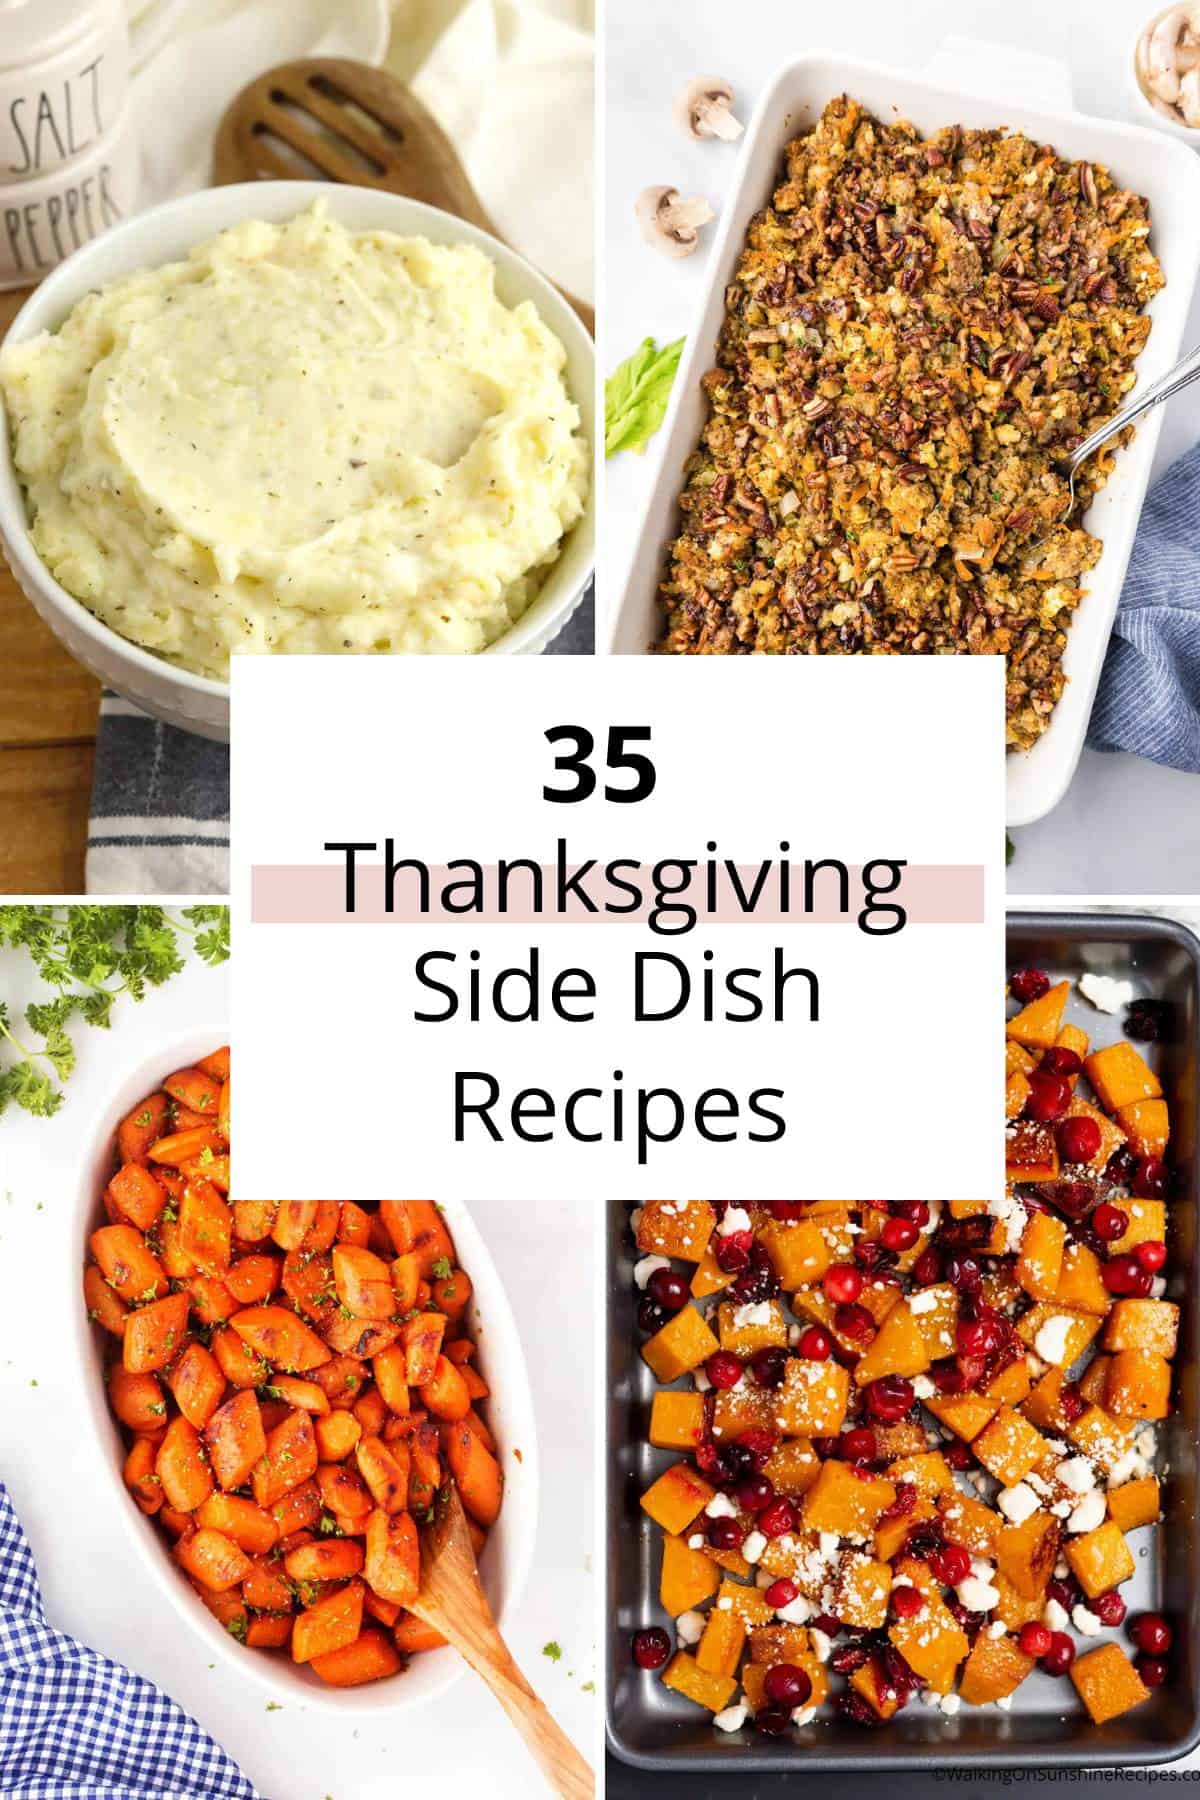 35 Best Thanksgiving Side Dish Ideas for a Crowd